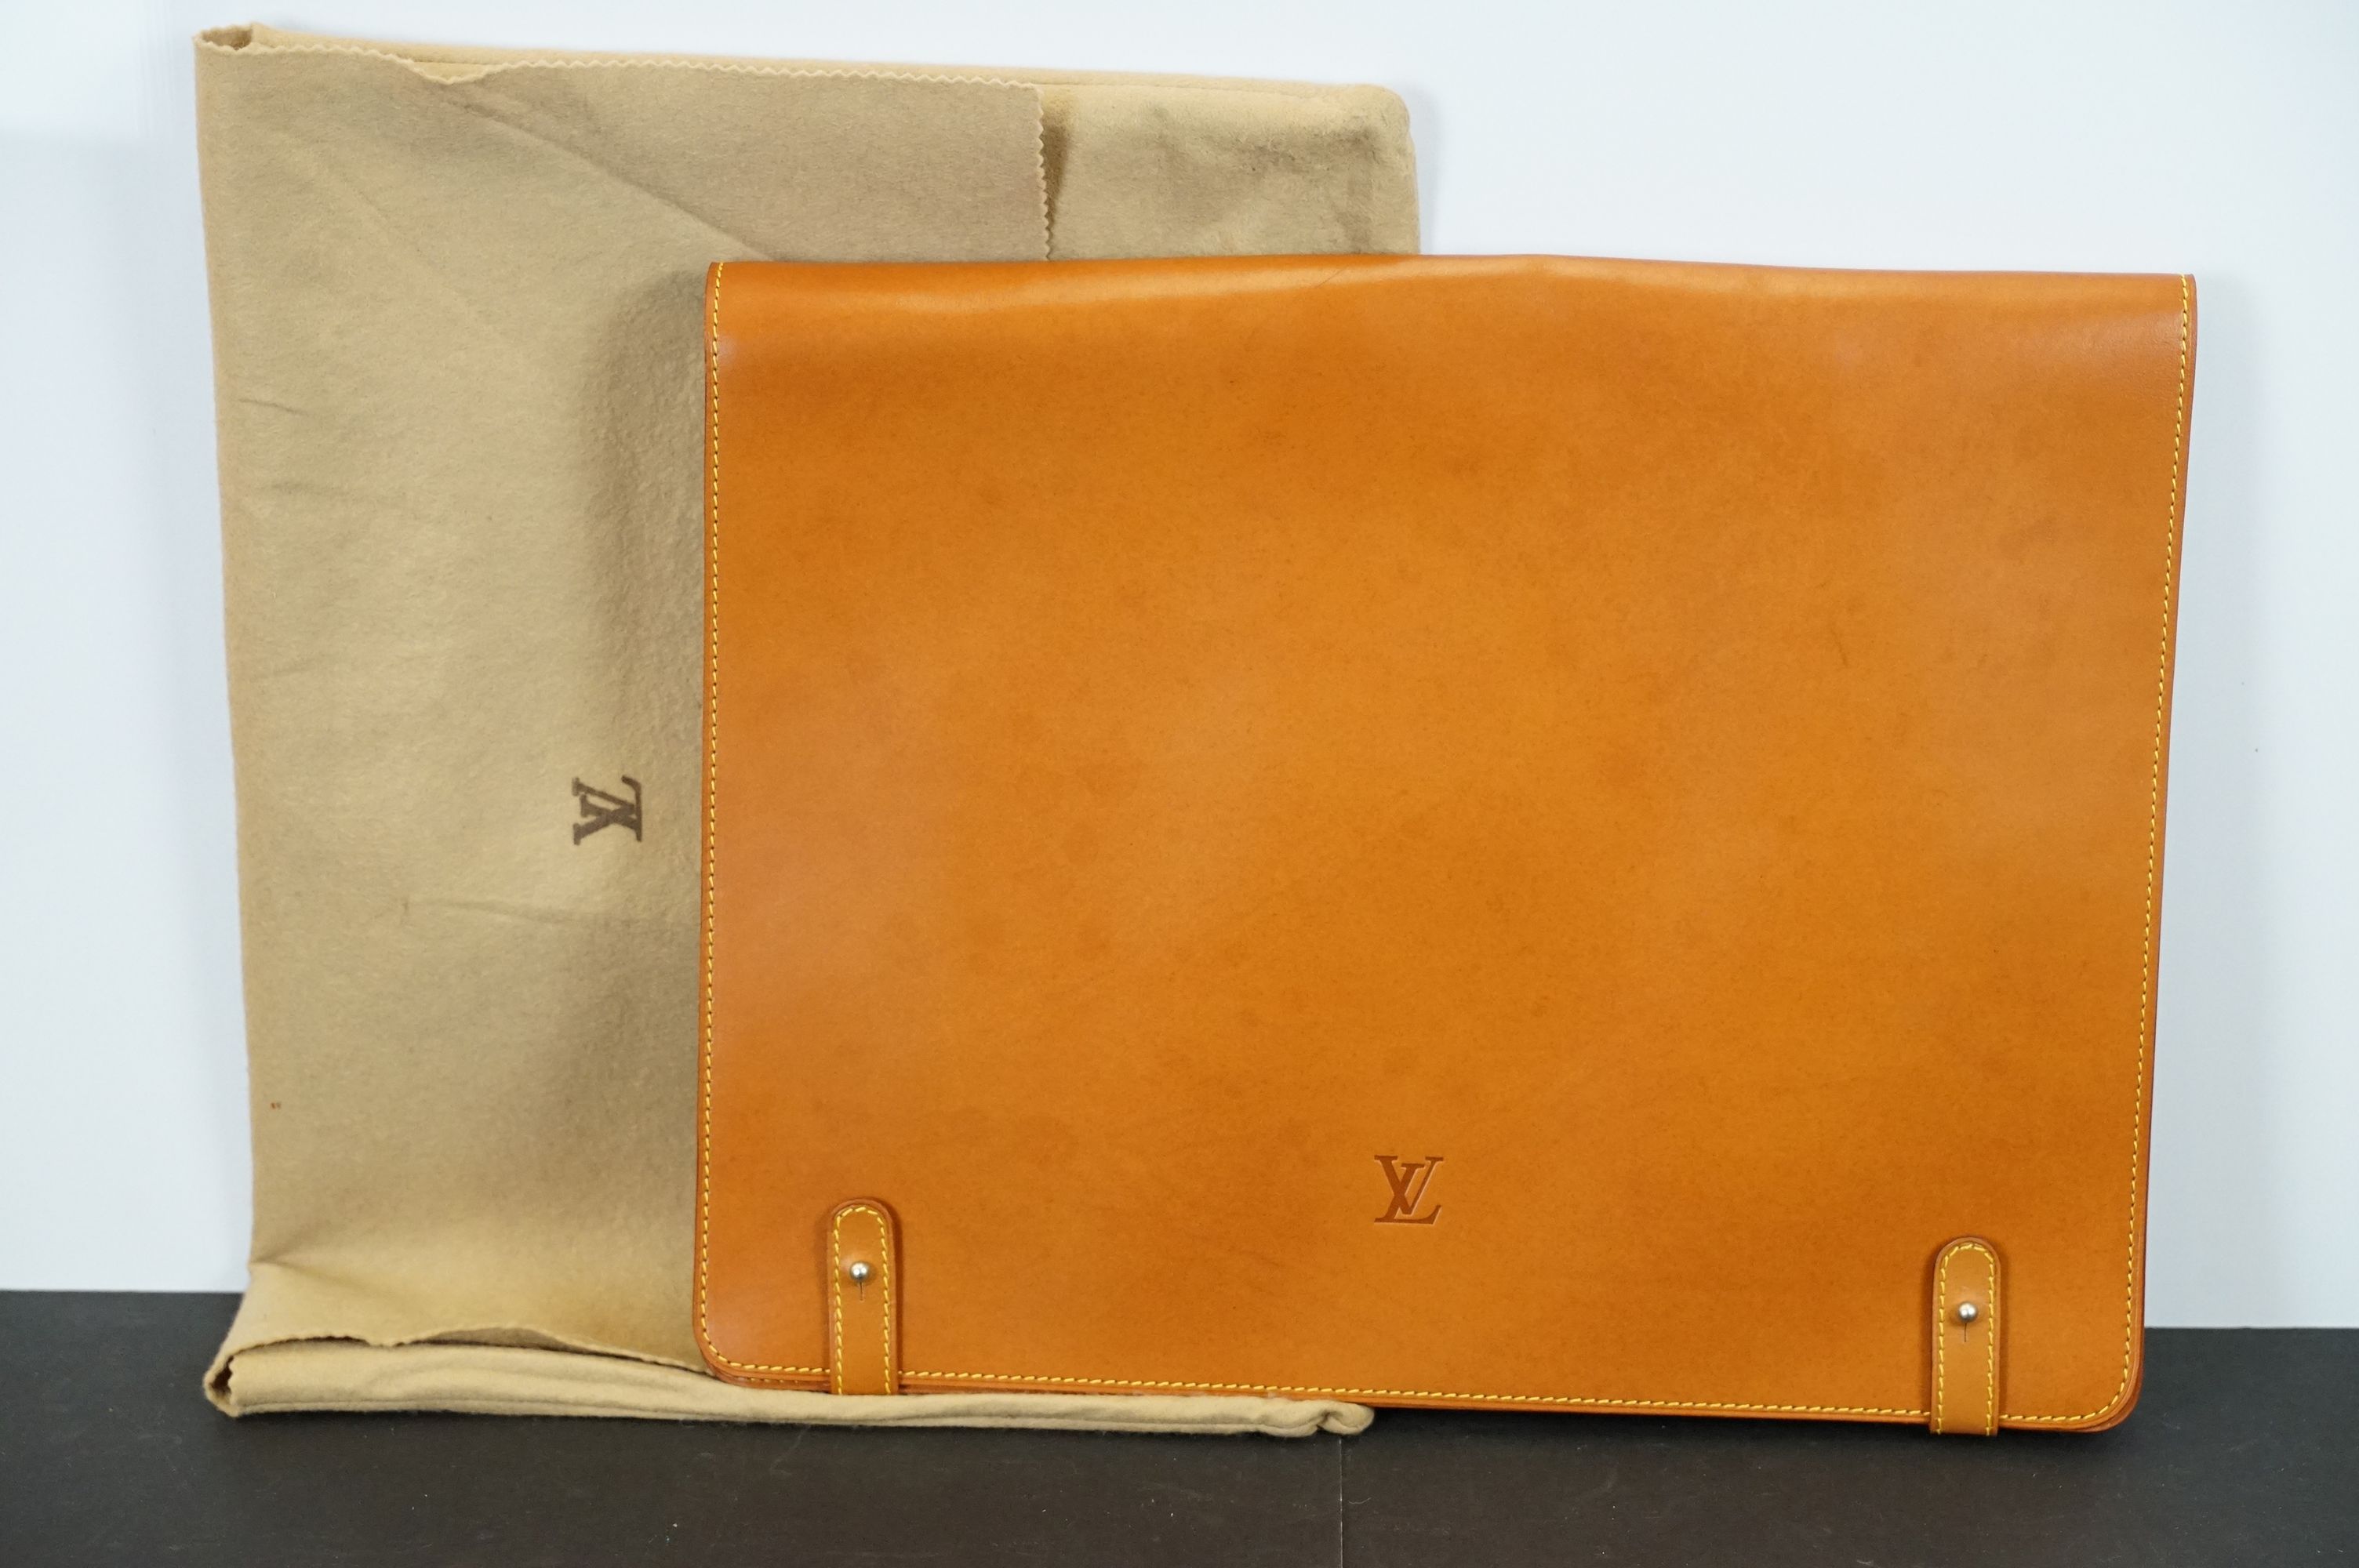 Louis Vuitton - Brown leather document case bag of folded rectangular shape with monogram to front